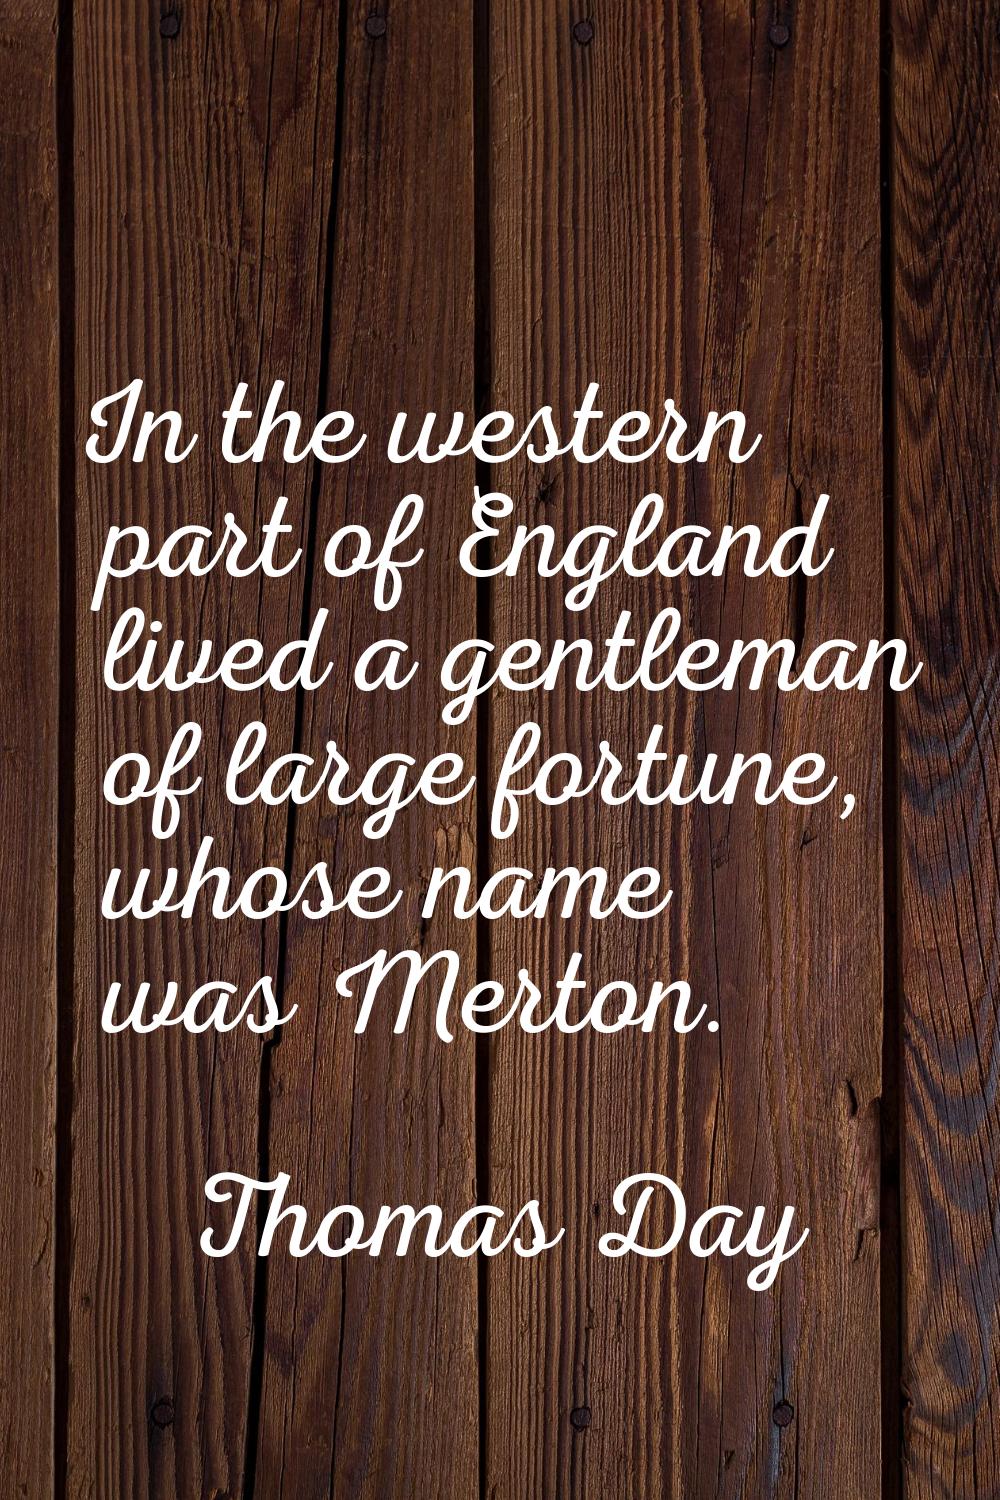 In the western part of England lived a gentleman of large fortune, whose name was Merton.